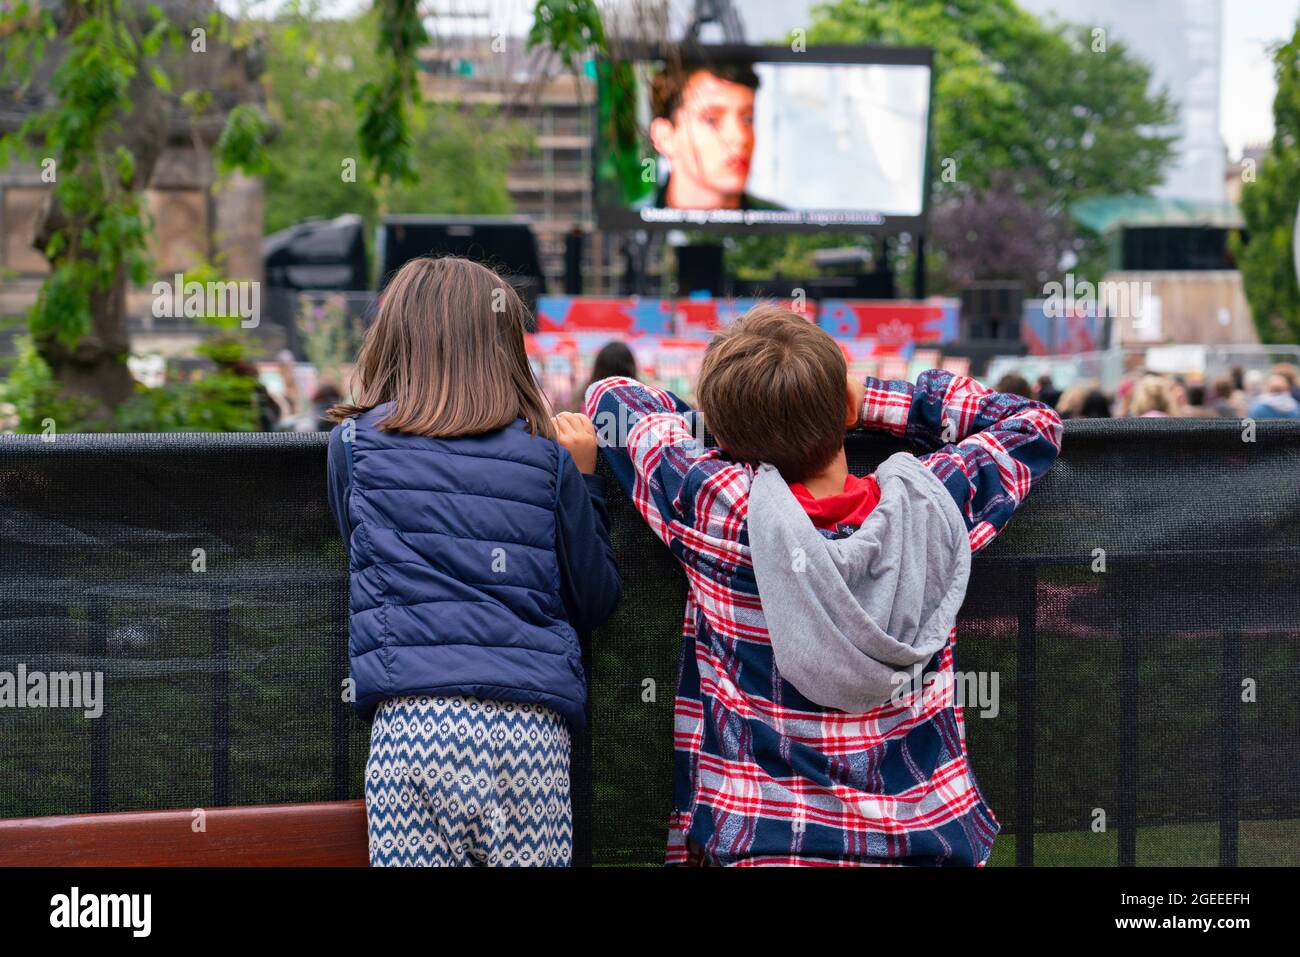 Edinburgh, Scotland, UK. 19th August  2021. Audience watch an outdoor screening of the cult movie Ferris Bueller’s Day Off at the  Film Fest in the City outdoor cinema in St Andrew Square. This is one of the events taking place during the Edinburgh International Film Festival in the city. Pic; Young movie goers watch the screening  from over the fence.  Iain Masterton/Alamy Live news. Stock Photo